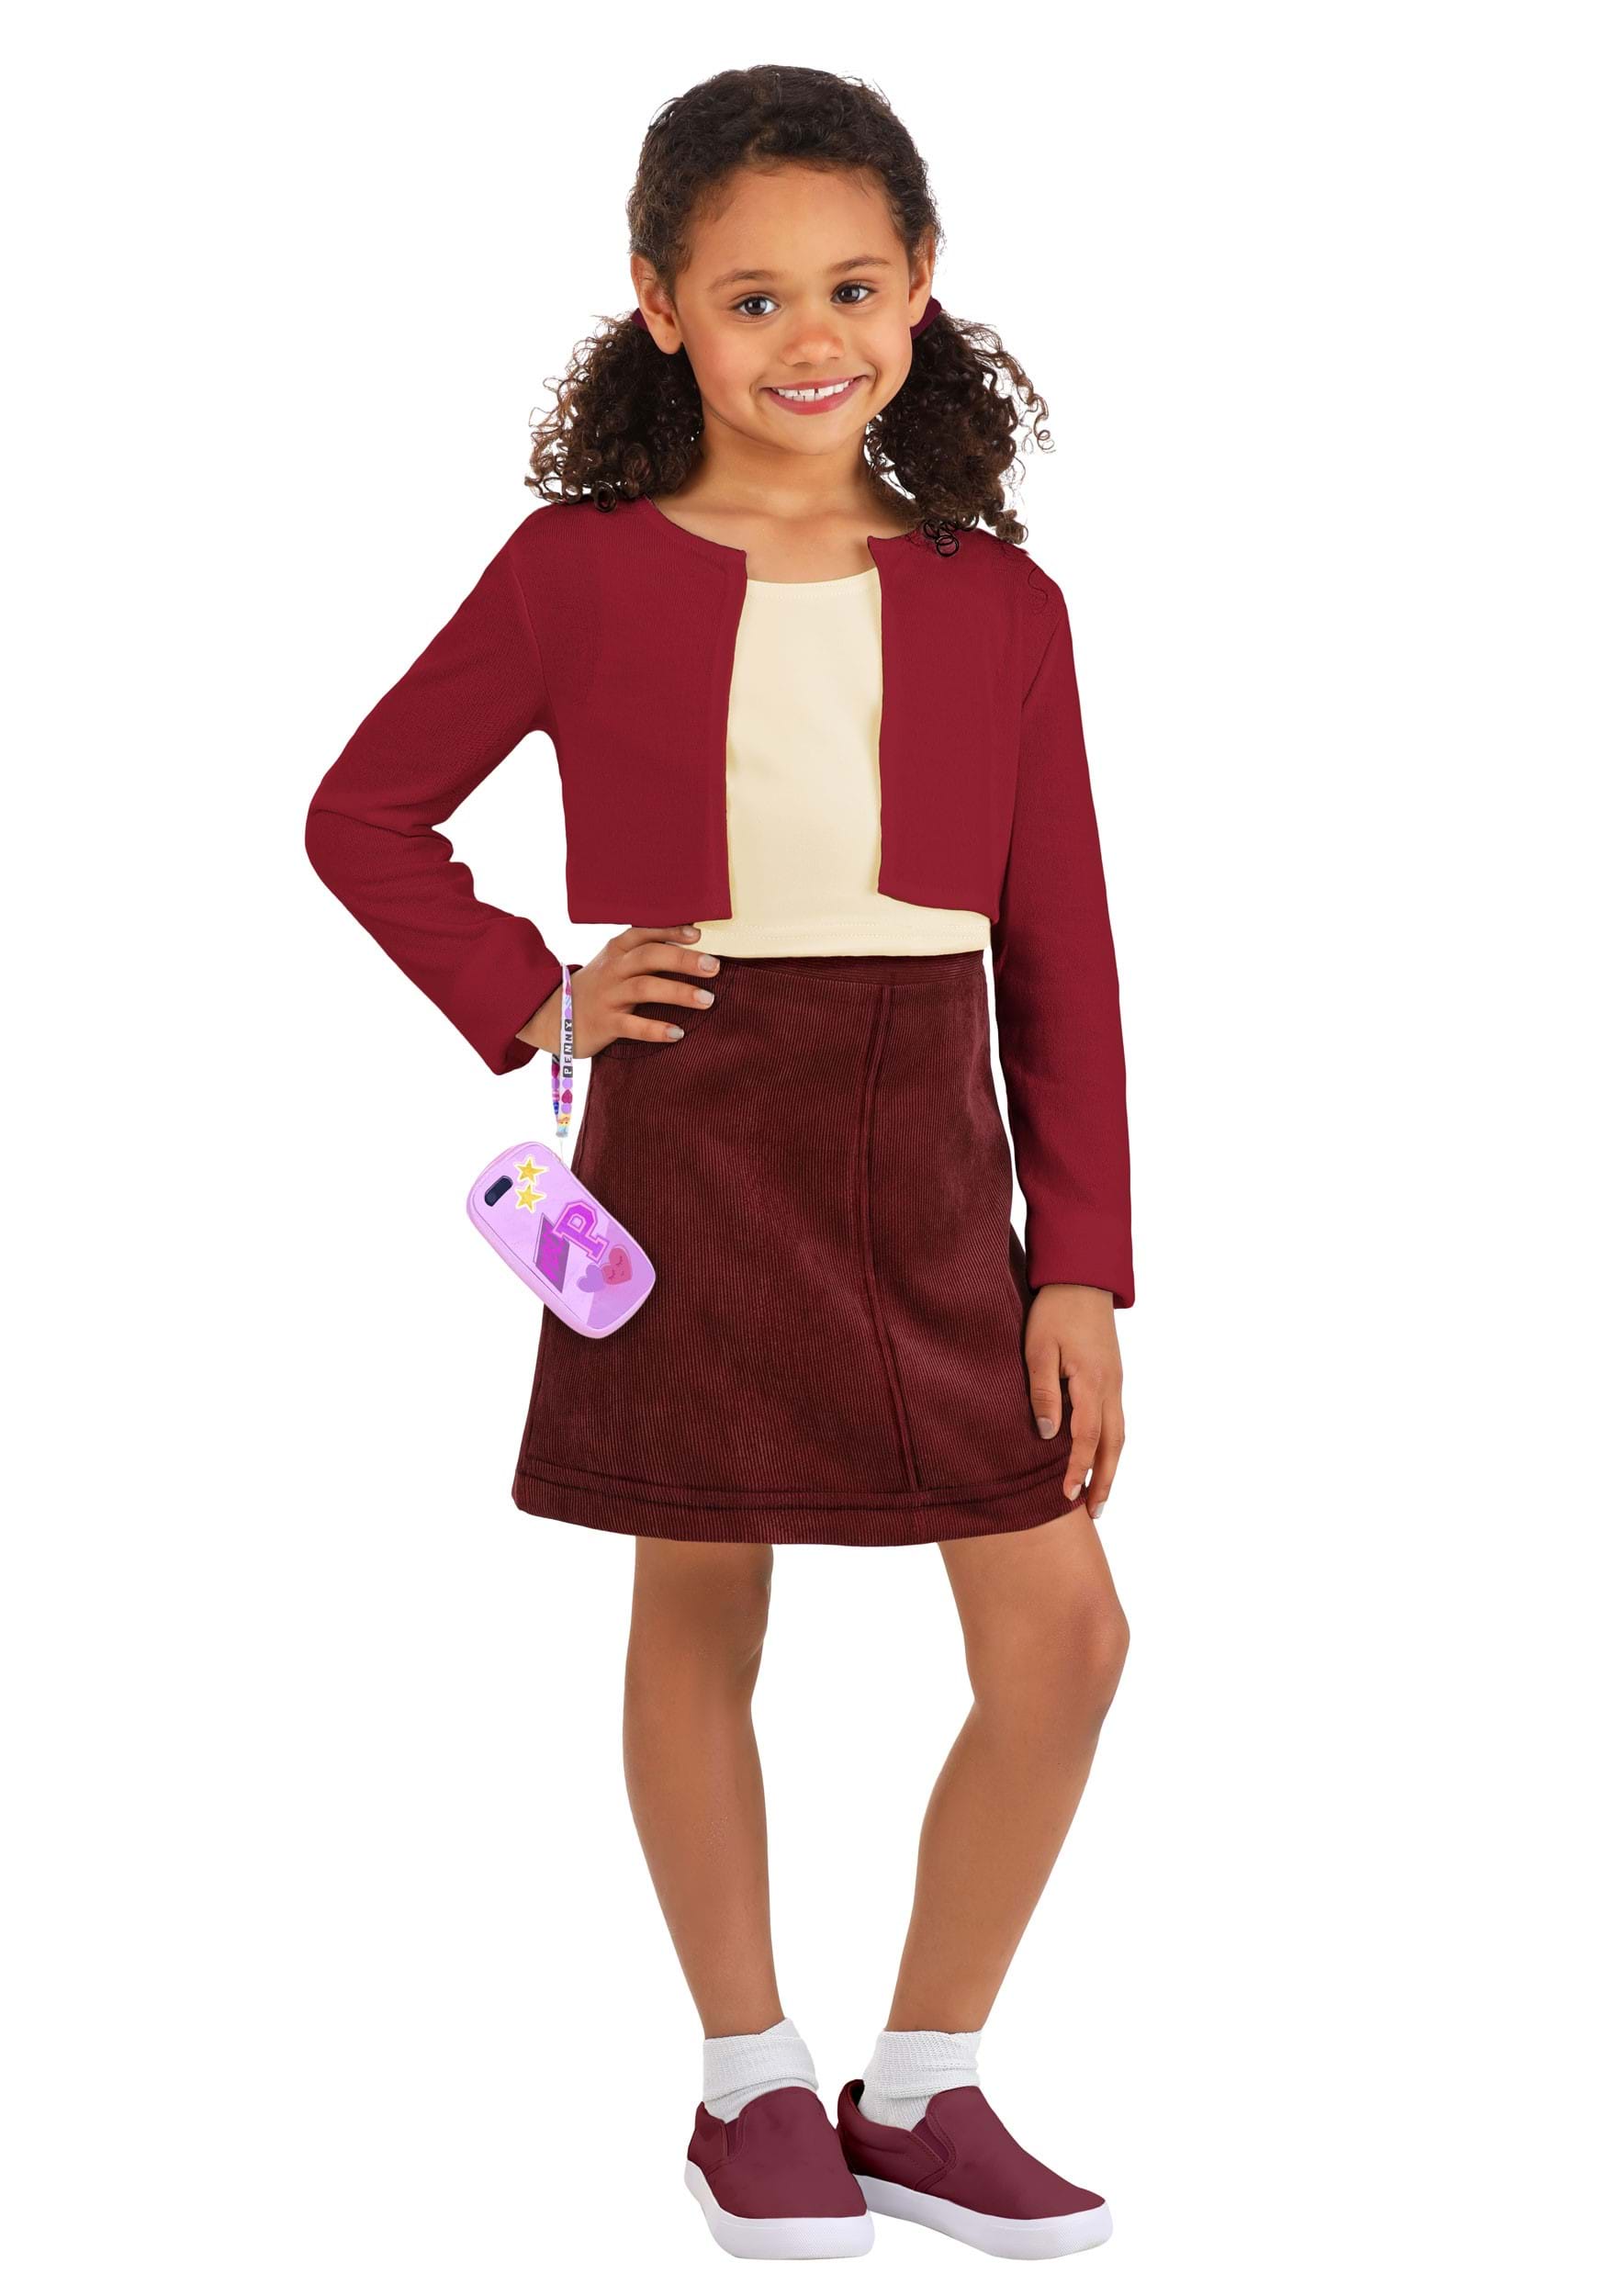 Penny Proud Costume for Girls